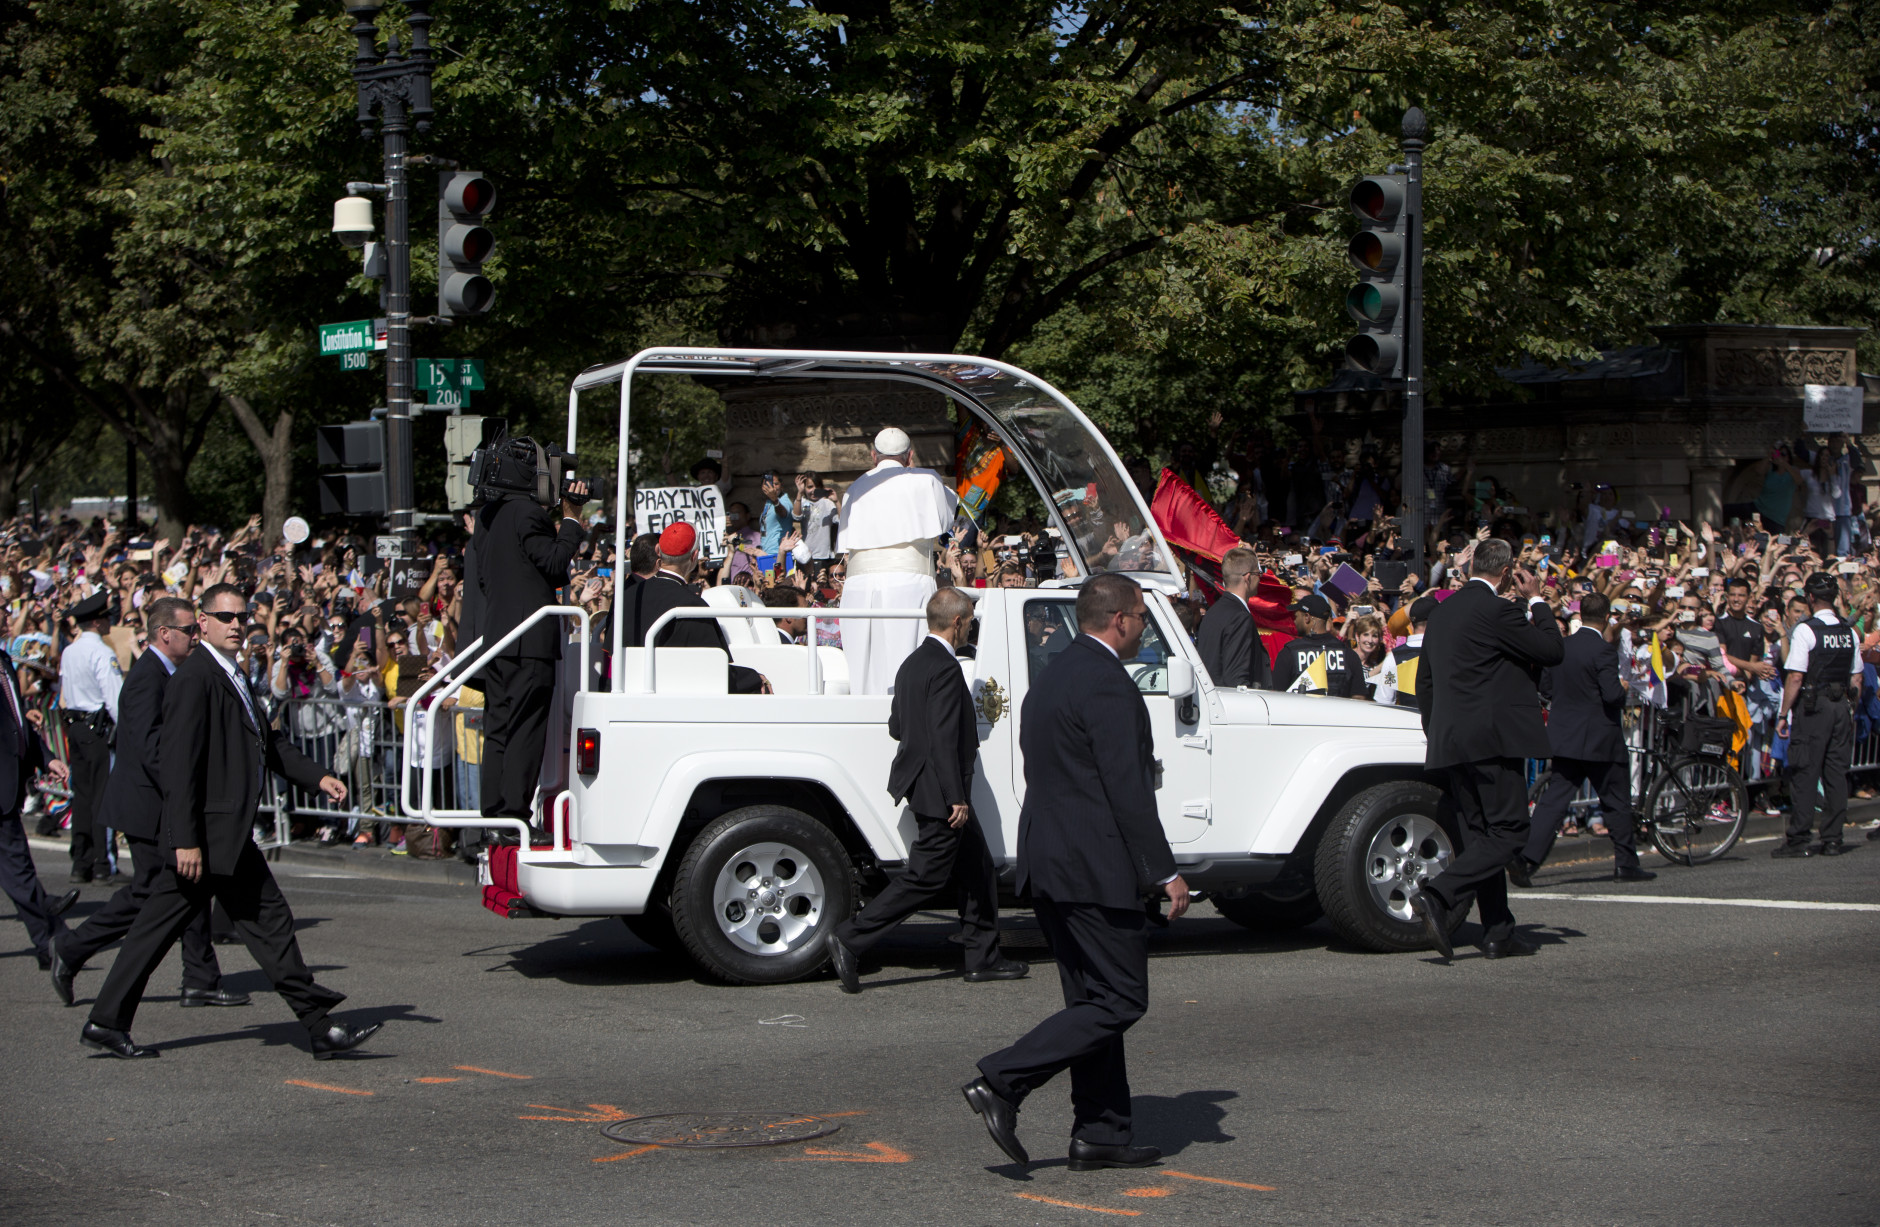 Pope Francis waves to the crowd from his popemobile at the corner of Constitution Avenue and 15th Street NW, during a parade around the Ellipse near the White House in Washington, Wednesday, Sept. 23, 2015. (AP Photo/Carolyn Kaster)